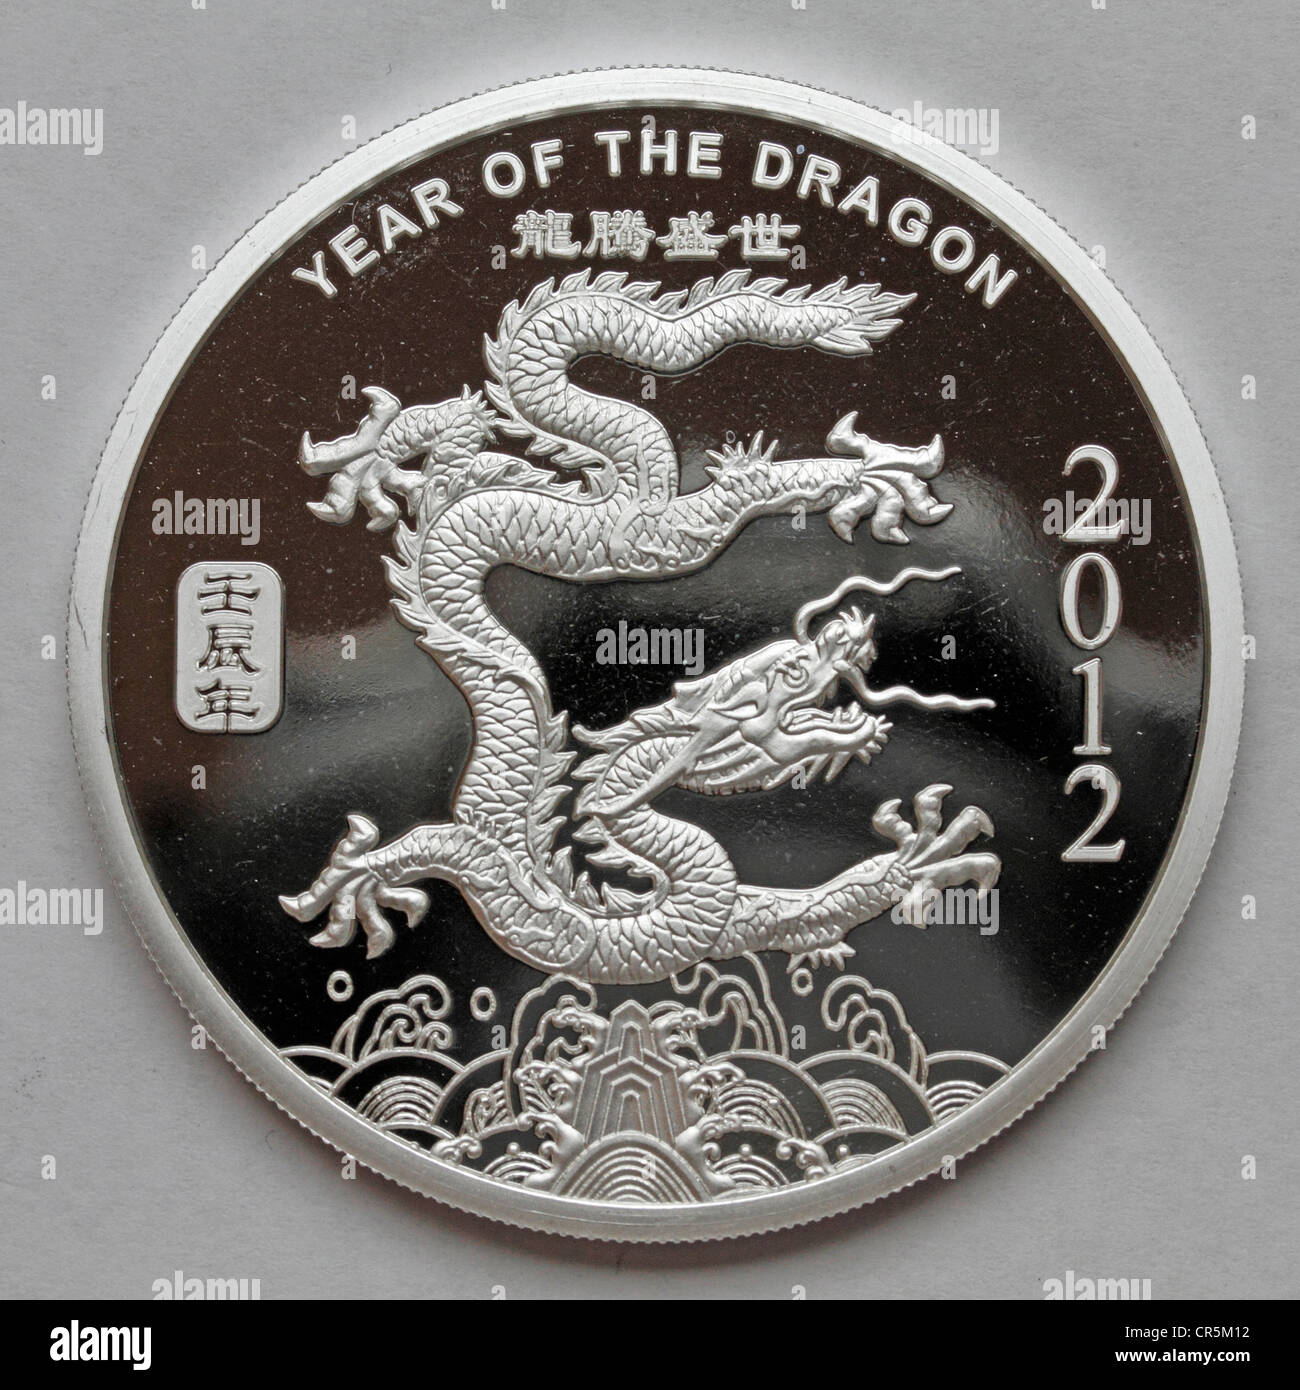 Year of the Dragon - Chinese 2 troy ounce silver coin - 2012 Stock Photo